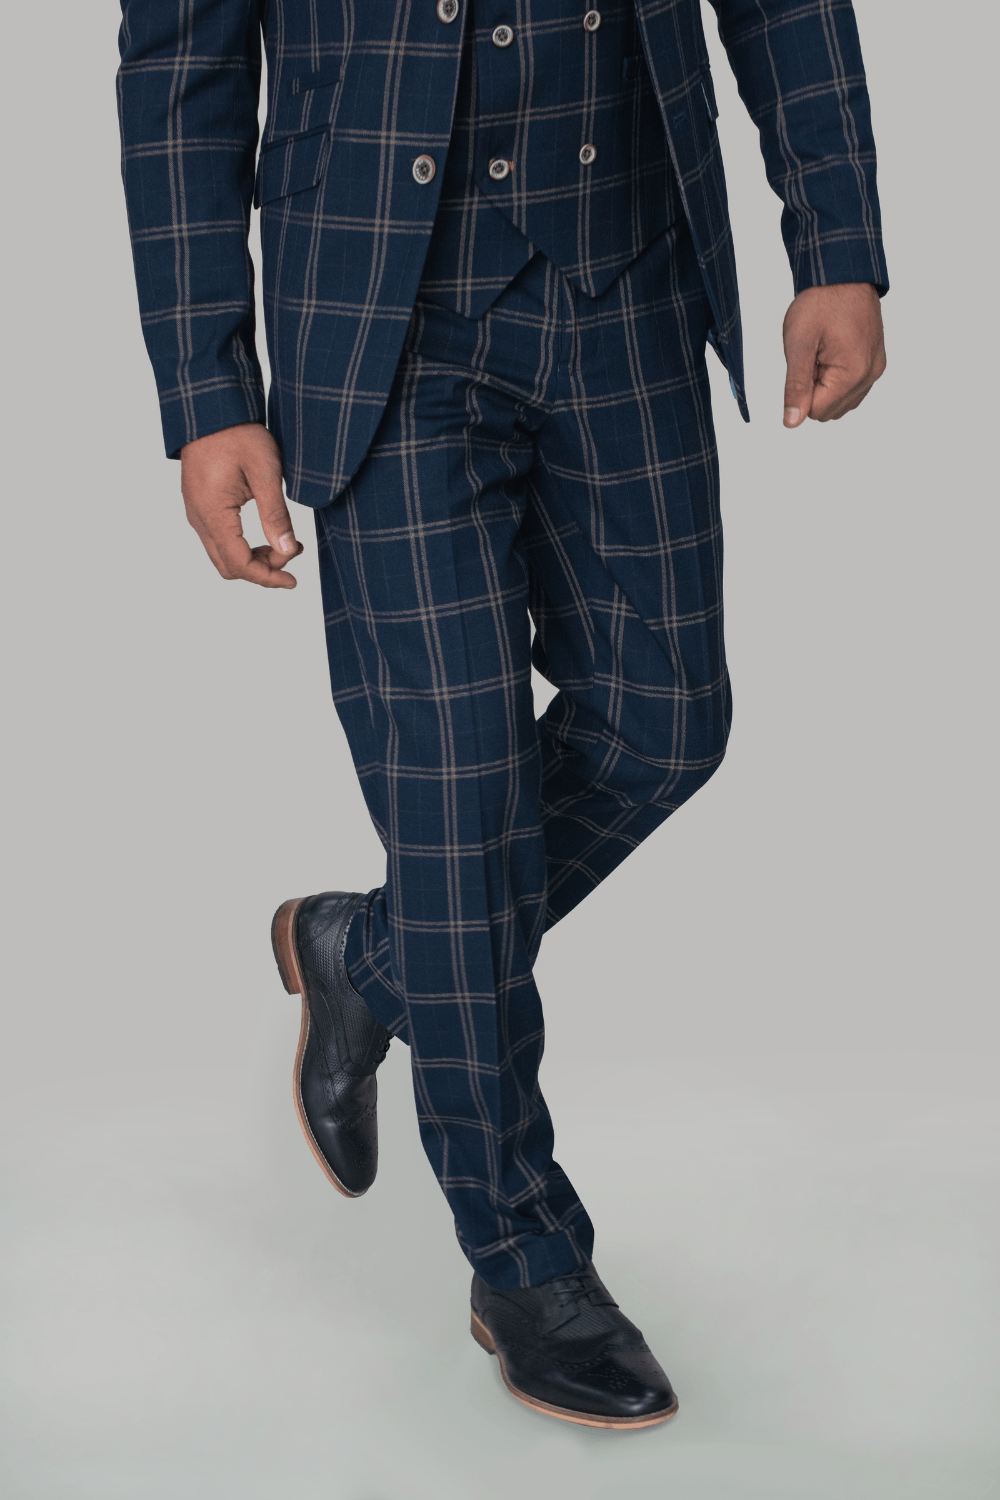 Double Check Navy Trousers - STOCK CLEARANCE - Trousers - 30R - THREADPEPPER